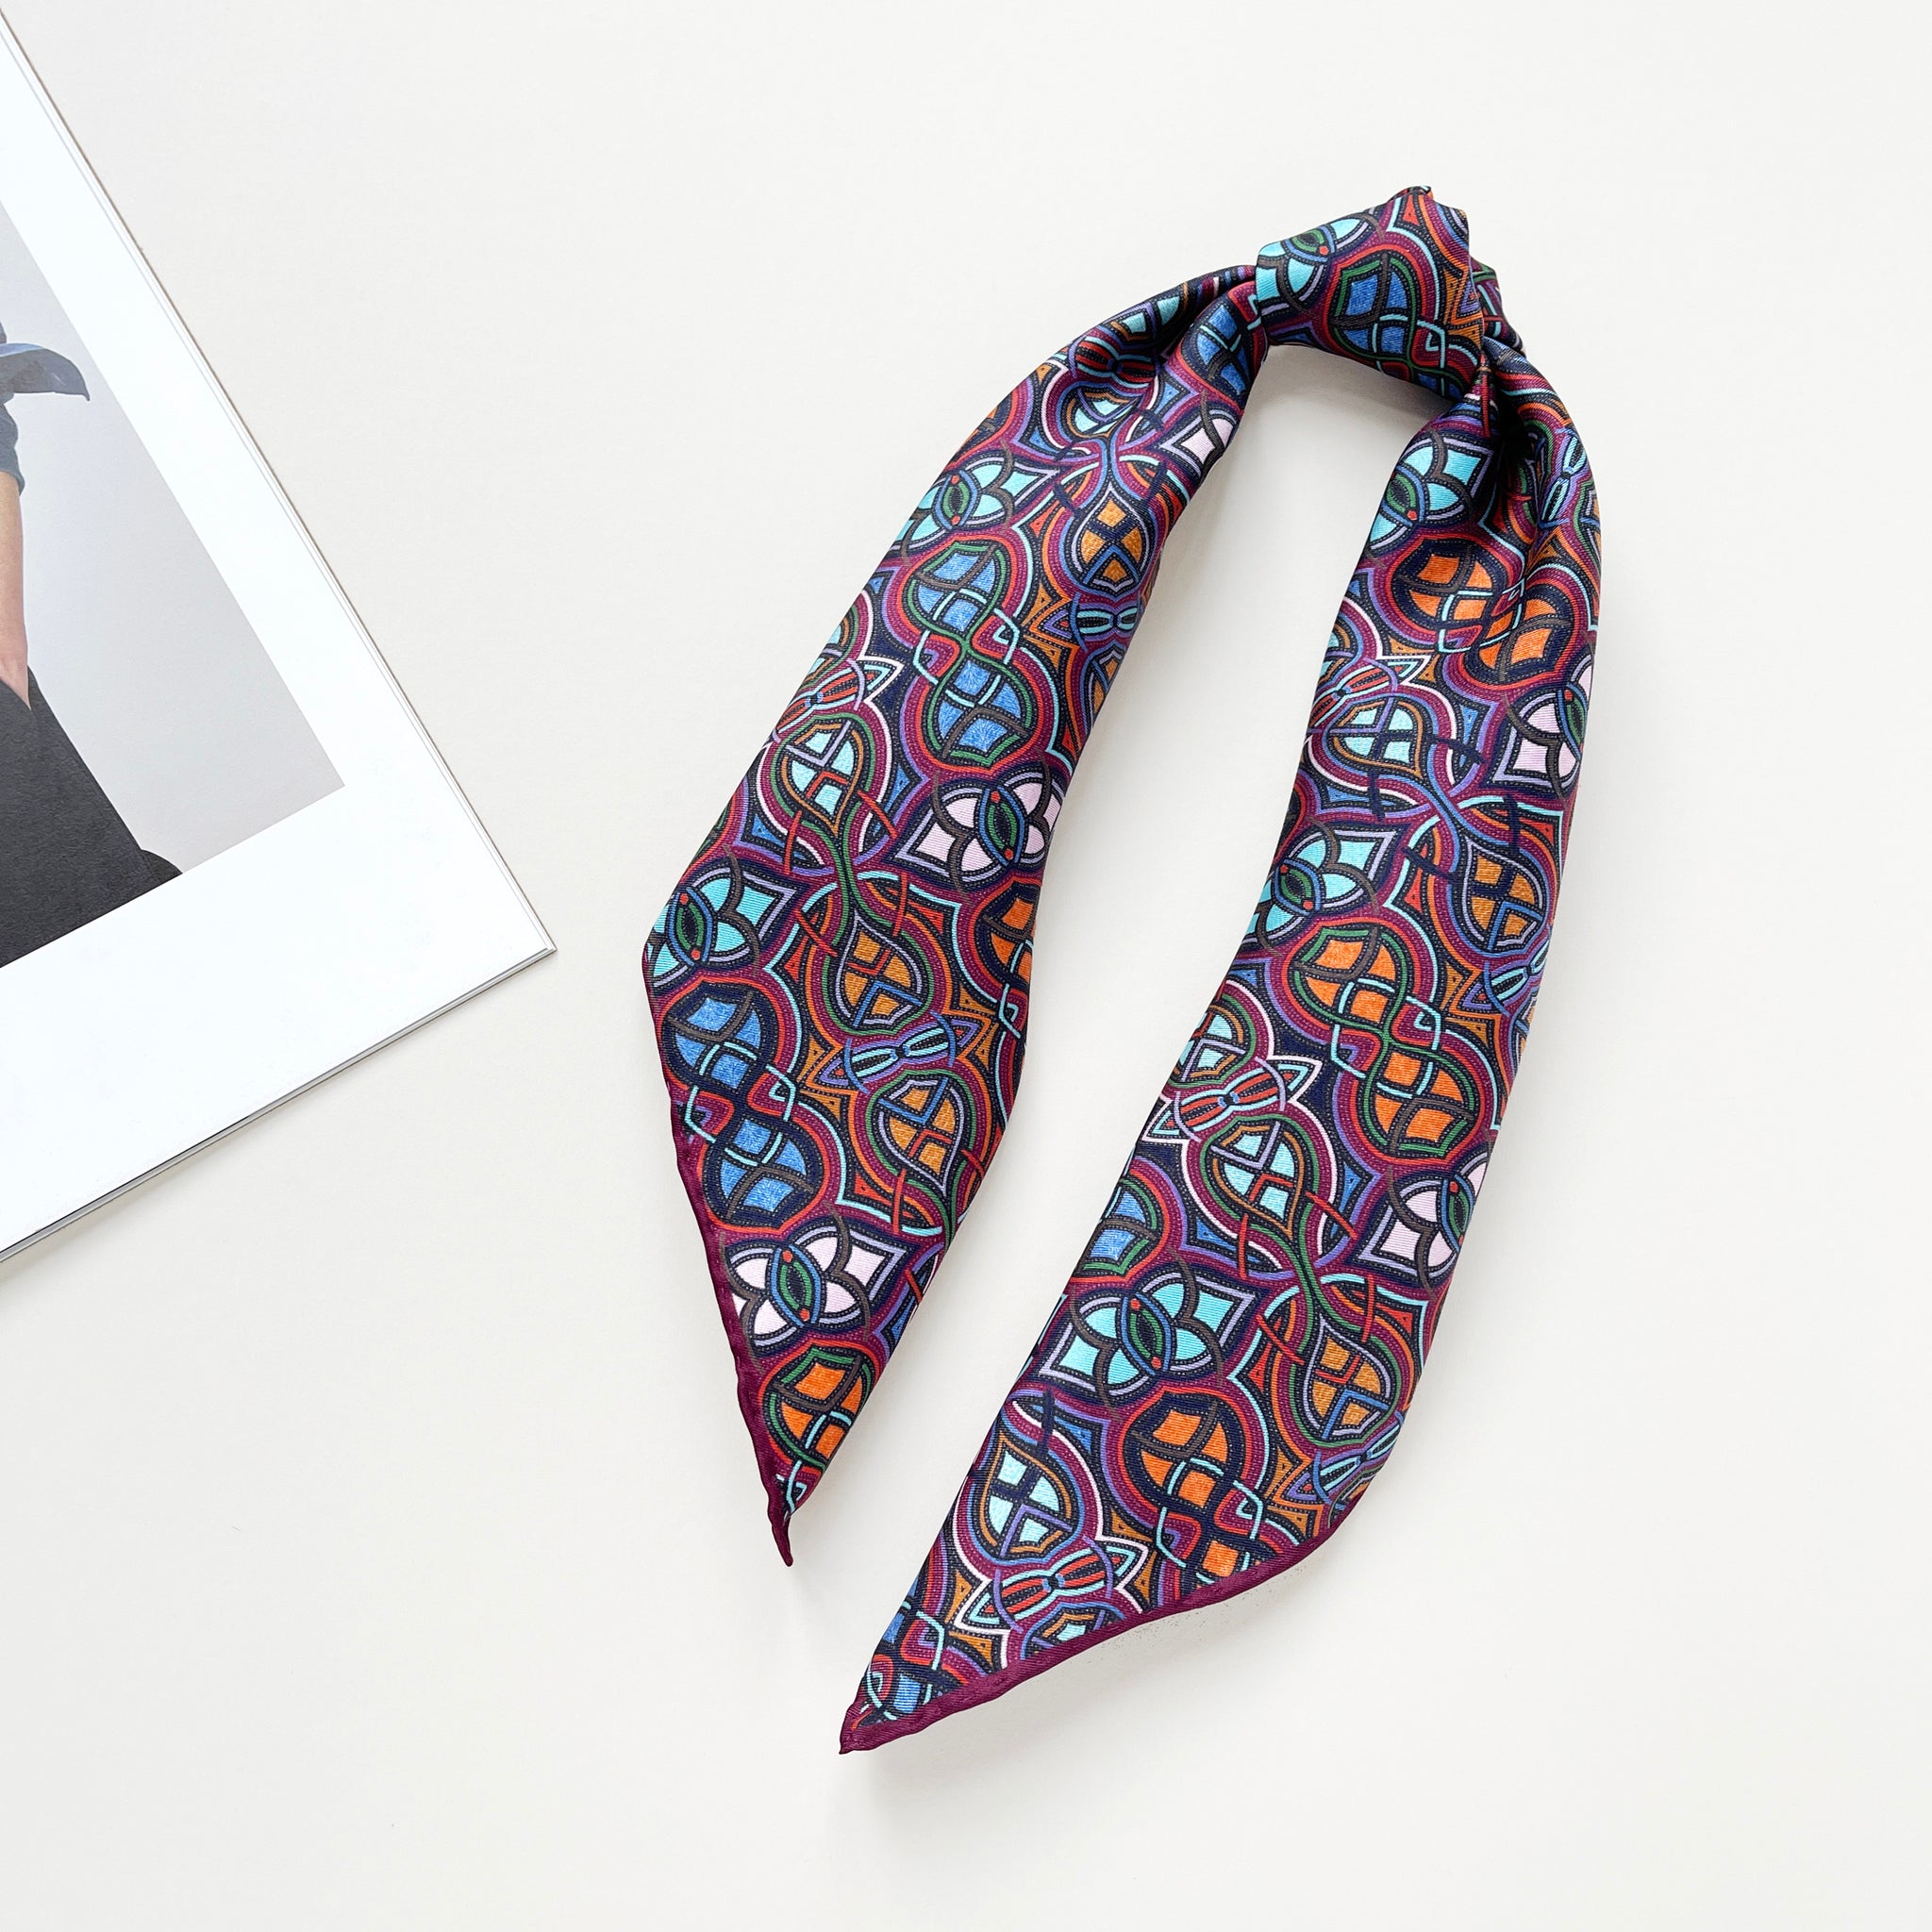 a silk neckerchief scarf featuring an abstract intricate pattern in plum purple, blue and orange hues, knotted as a ponytail